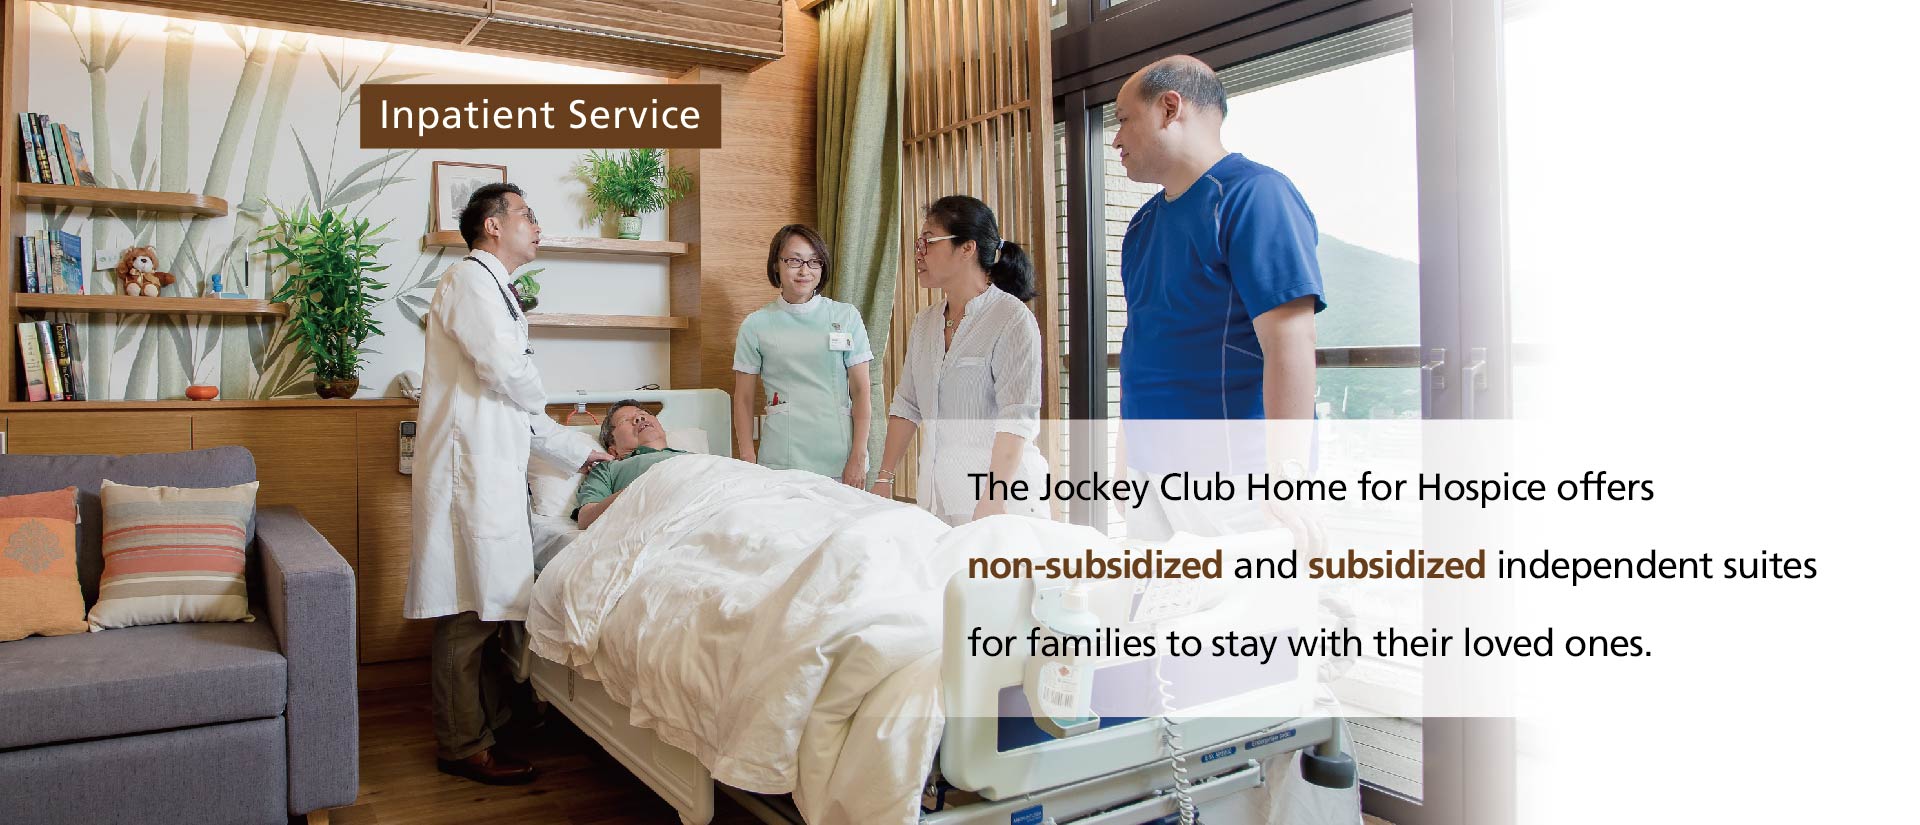 Jockey Club Home for Hospice - Inpatient